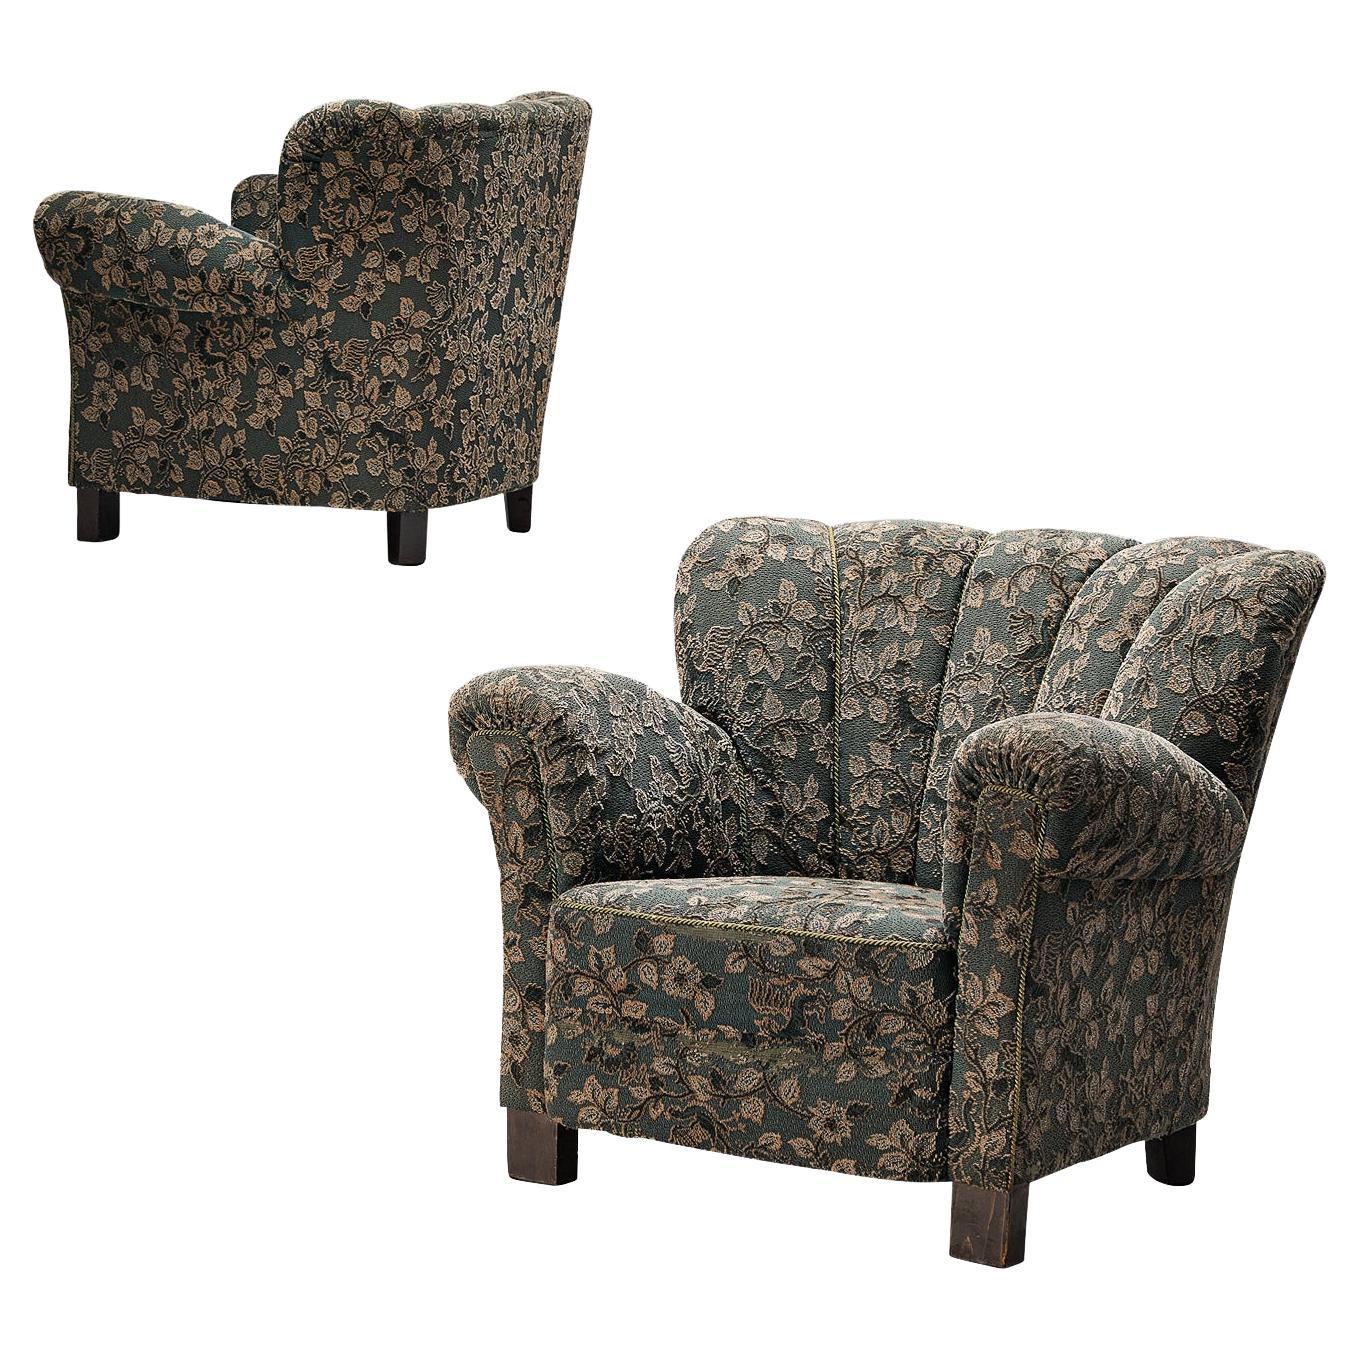 Delicate Pair of Lounge Chairs in Green and Beige Floral Upholstery  For Sale